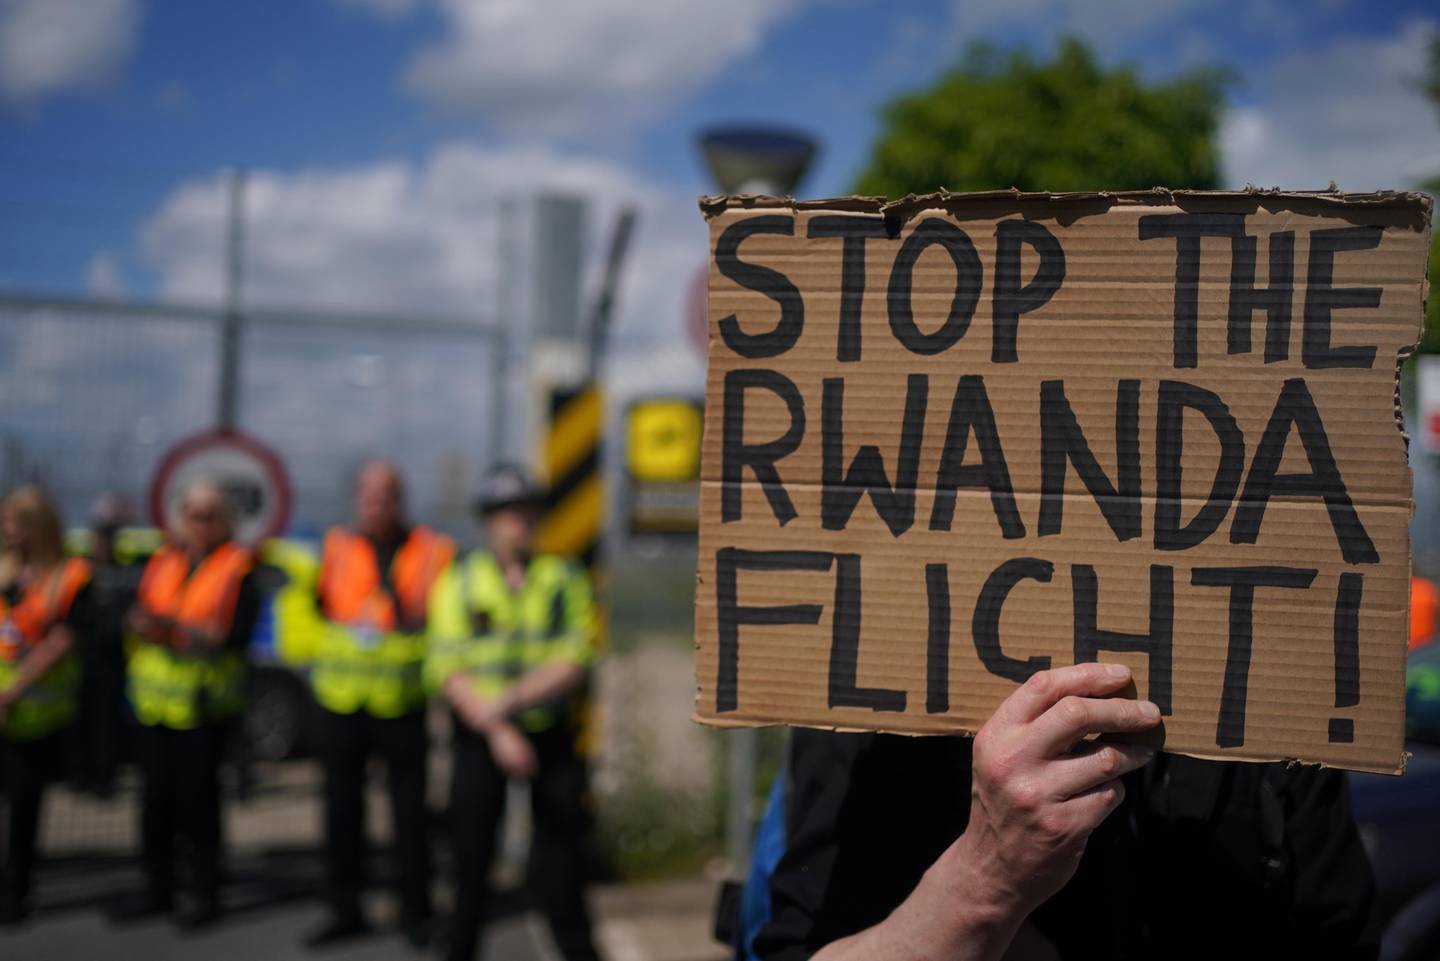 Demonstrators at a removal centre at Gatwick protest against plans to send migrants to Rwanda.